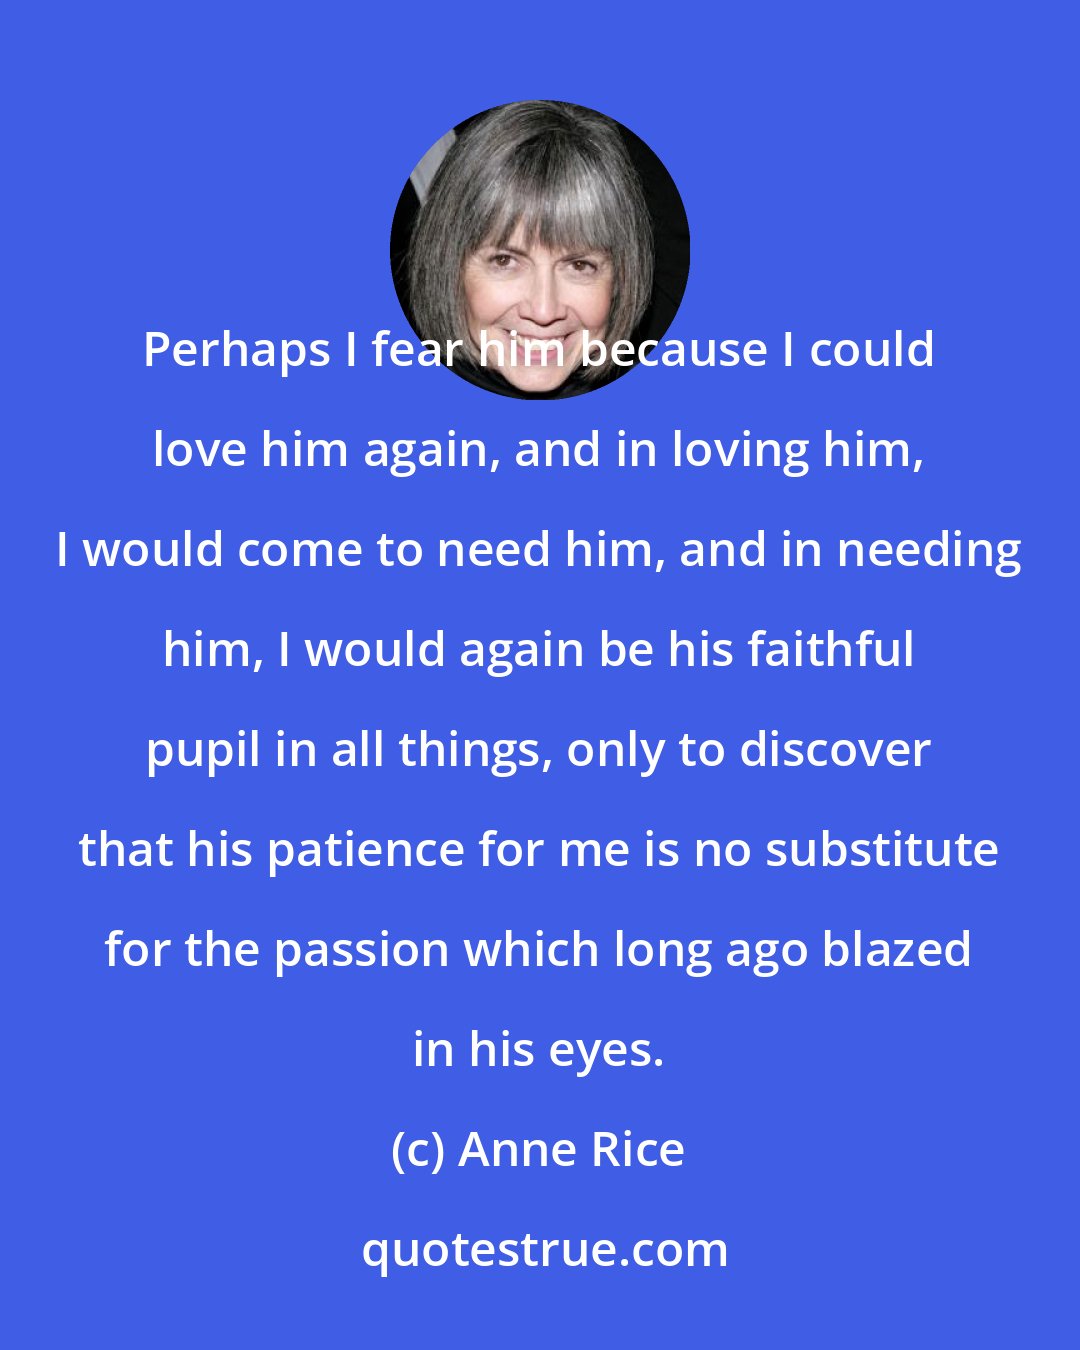 Anne Rice: Perhaps I fear him because I could love him again, and in loving him, I would come to need him, and in needing him, I would again be his faithful pupil in all things, only to discover that his patience for me is no substitute for the passion which long ago blazed in his eyes.